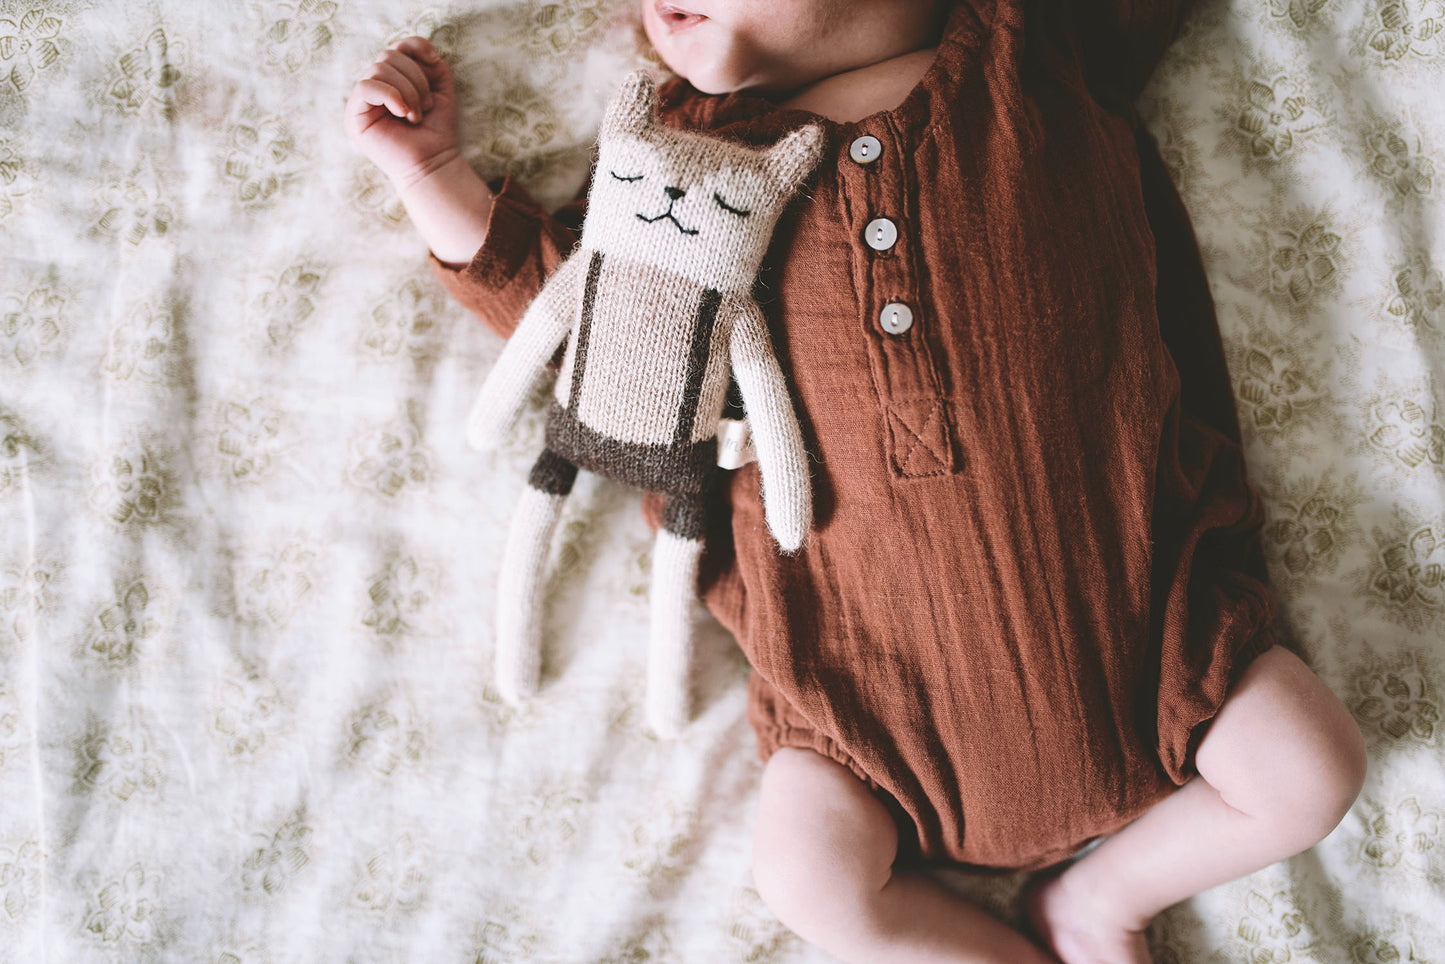 Fawn Knit Toy- Overalls